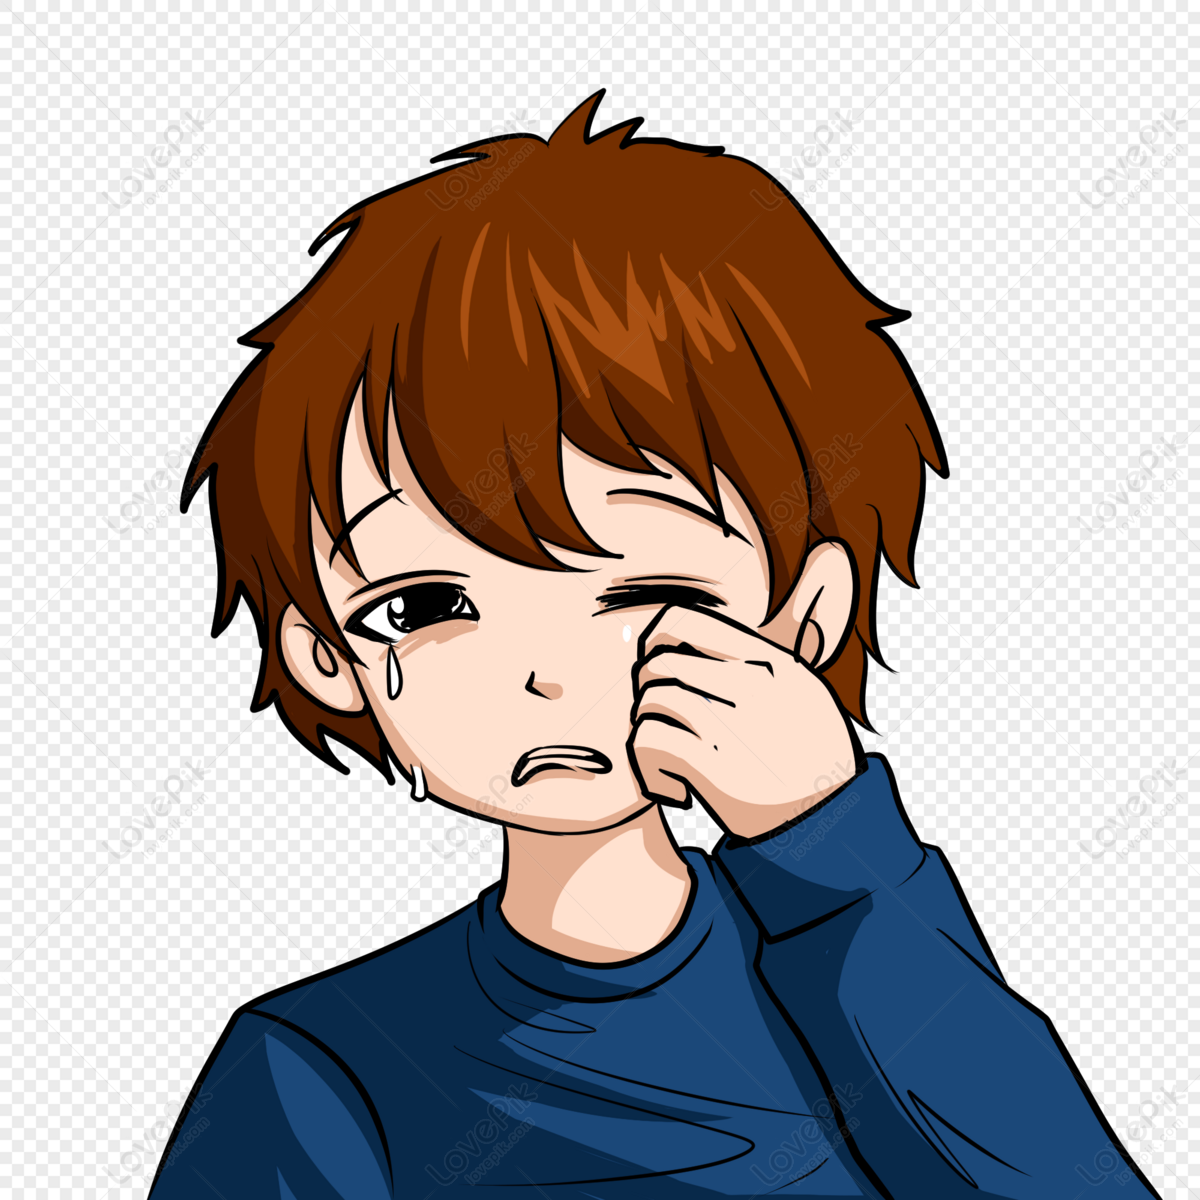 Crying Man Clipart Image